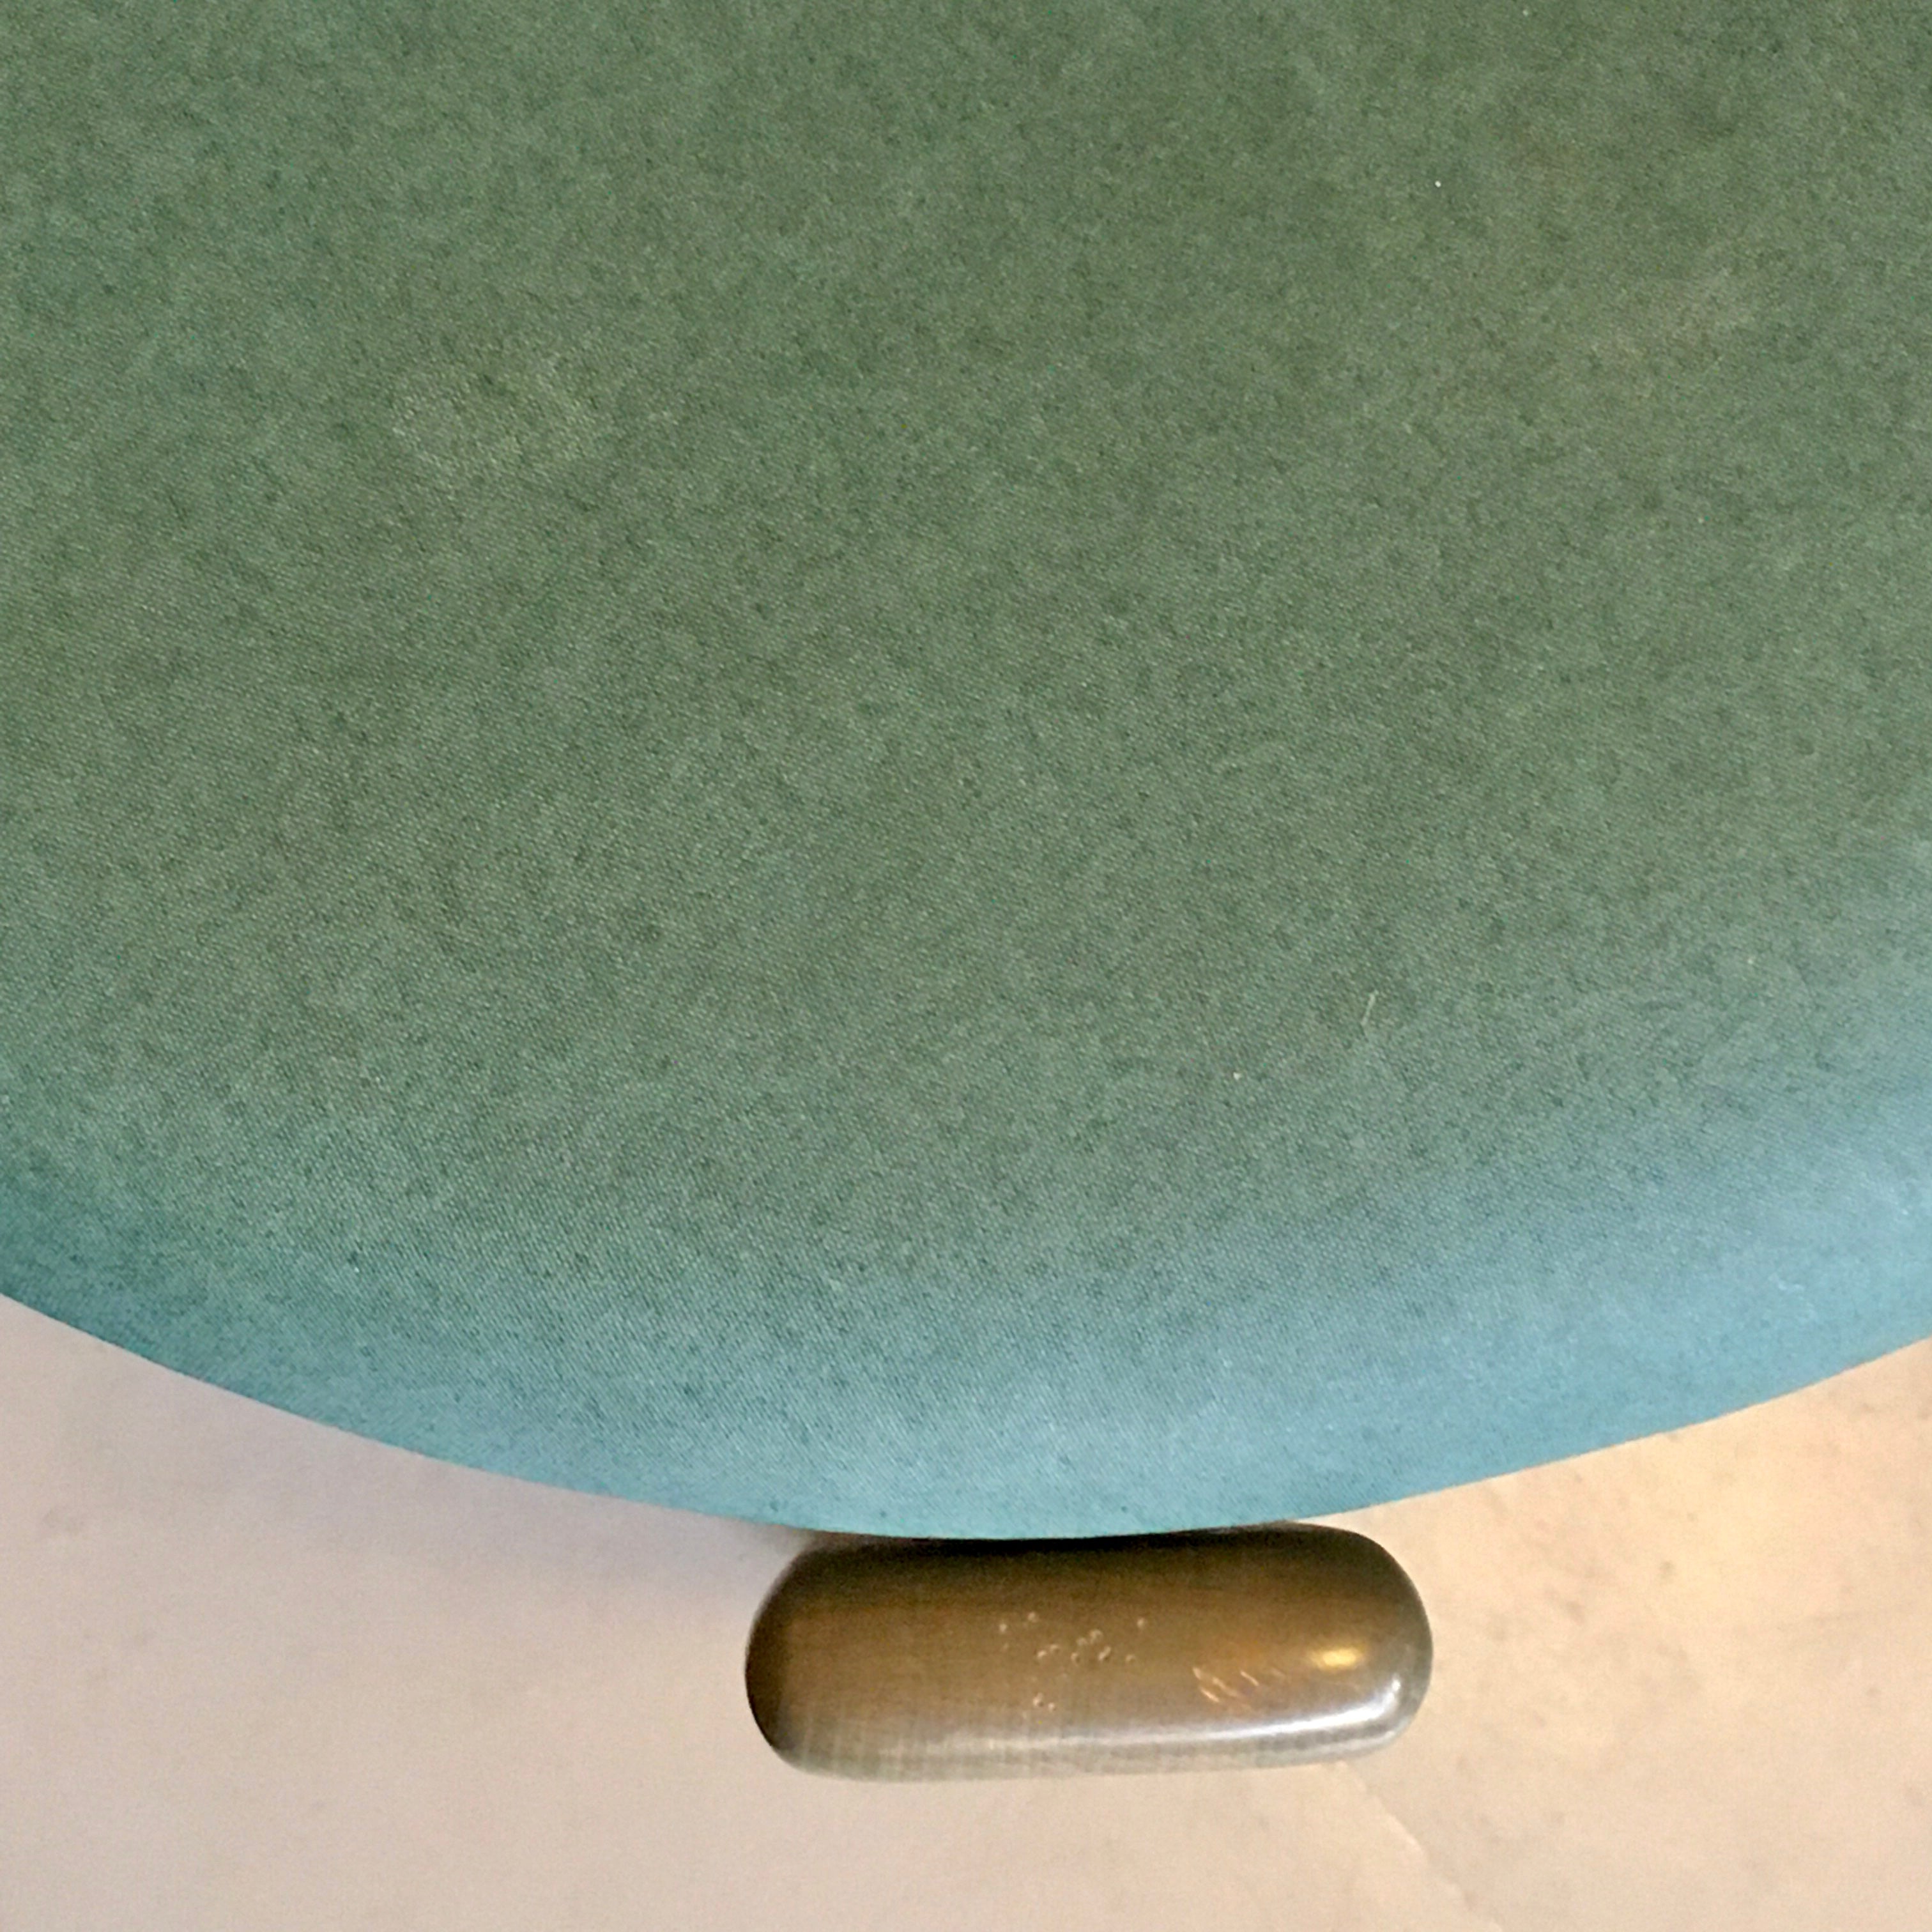 stool by Bruno Rey for Dietiker, made in Switzerland. The stools are solid, robust and comfortable possibility of stacking The version offered here is in stained wood in a deep olive green colour, and green lavable skai seats. The stools are in good